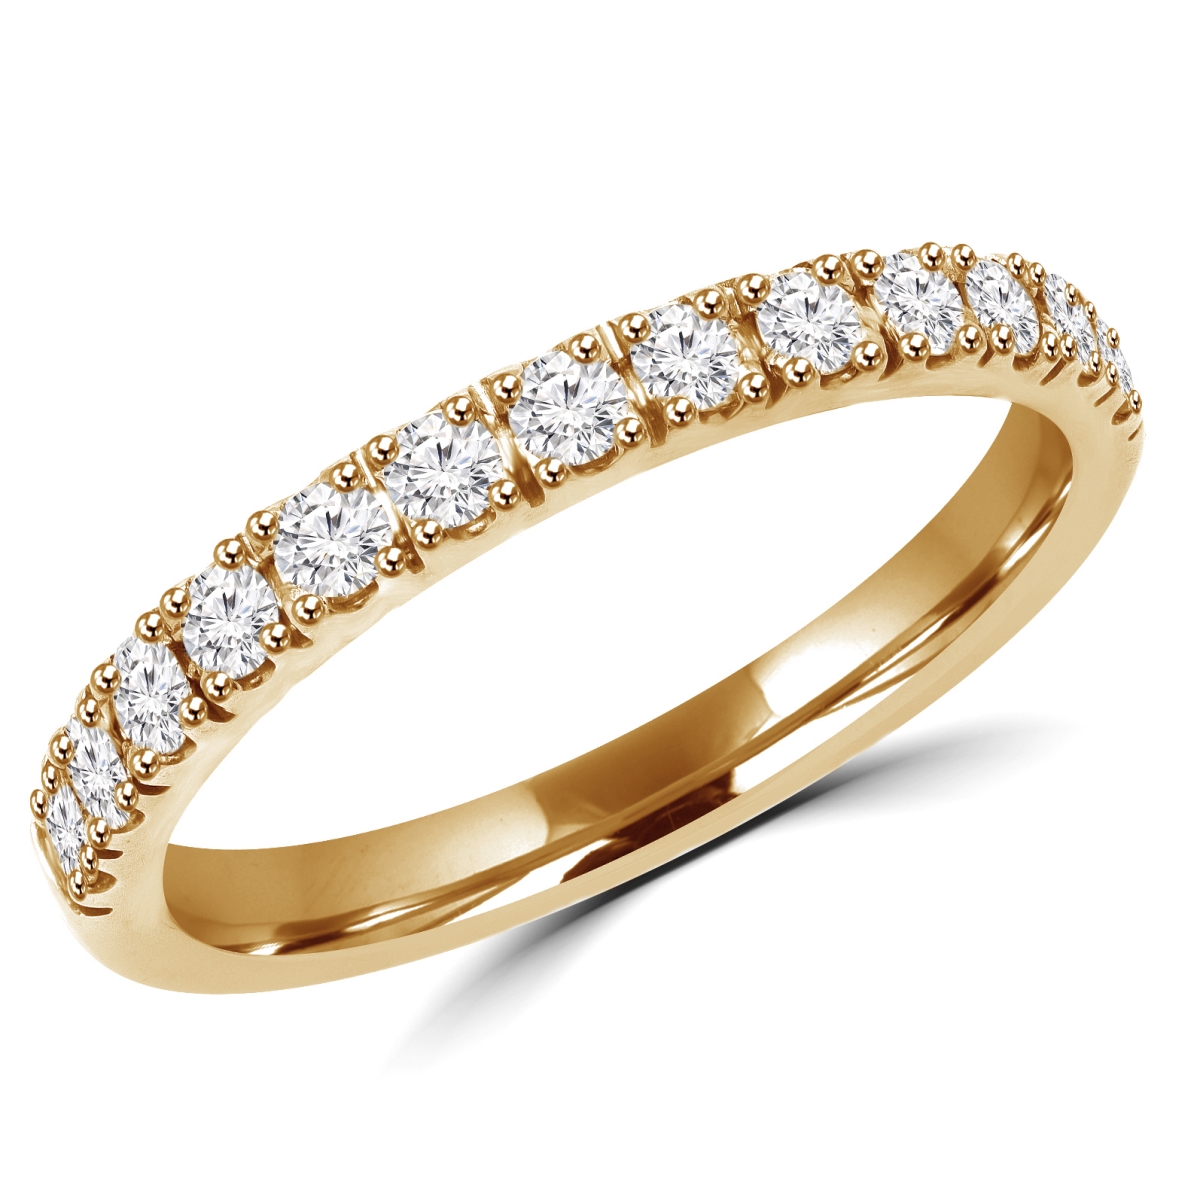 Picture of Majesty Diamonds MD180187-P 0.3 CTW Round Diamond Semi-Eternity Wedding Band Ring in 14K Yellow Gold